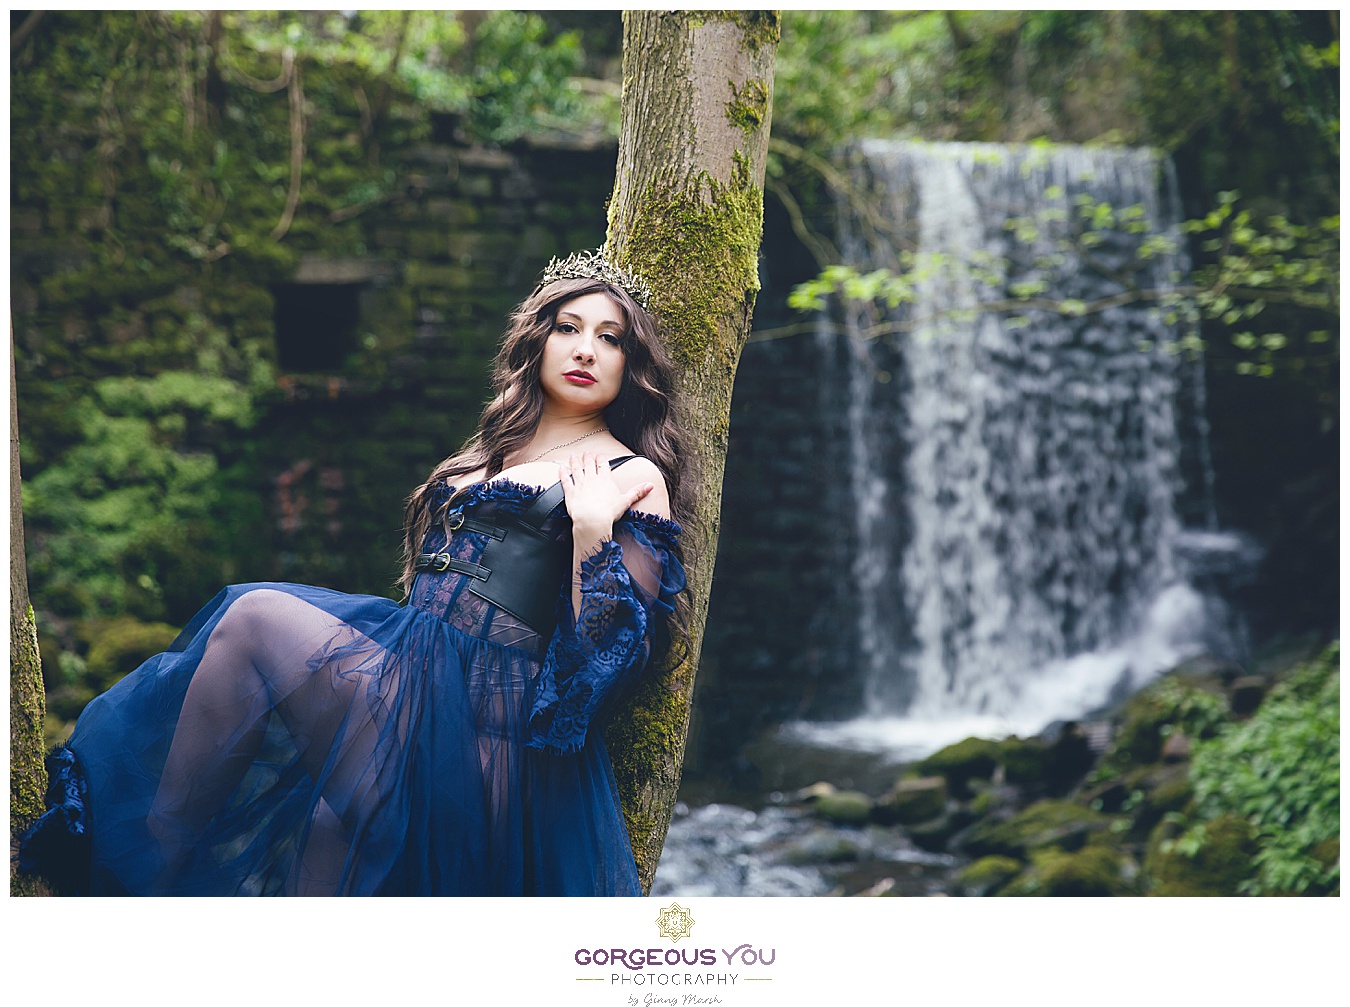 Navy tulle dress with black bodice, wearing a crown, in front of a waterfall | Divine feminine goddess boudoir photoshoot | Gorgeous You Photography | North Yorkshire